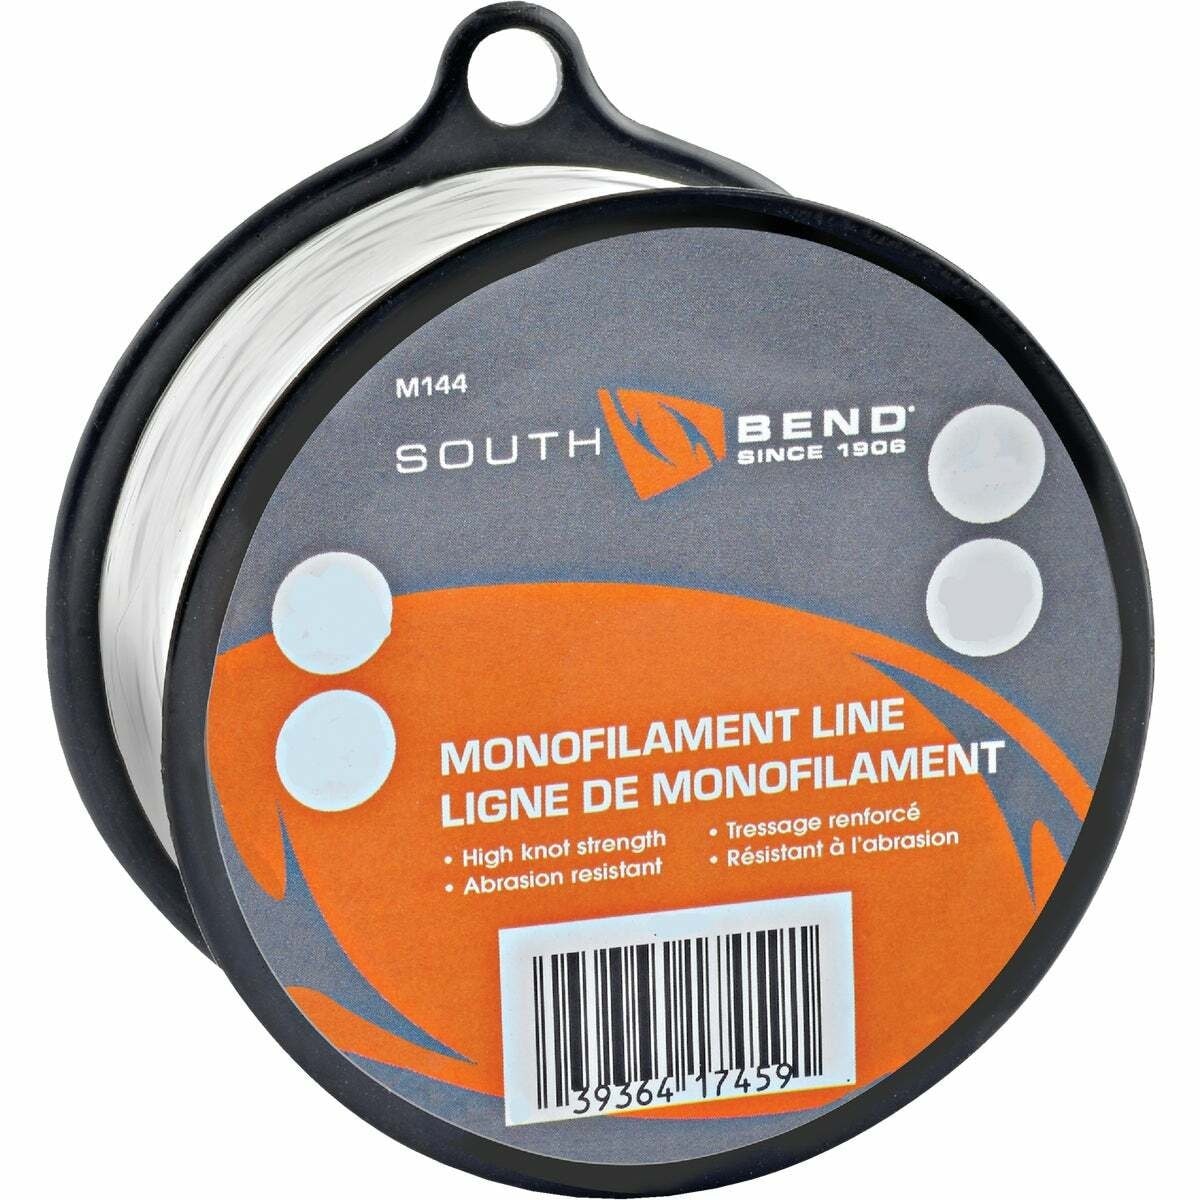 SouthBend 12 Lb. 500 Yd. Clear Monofilament Fishing Line - 1 Each